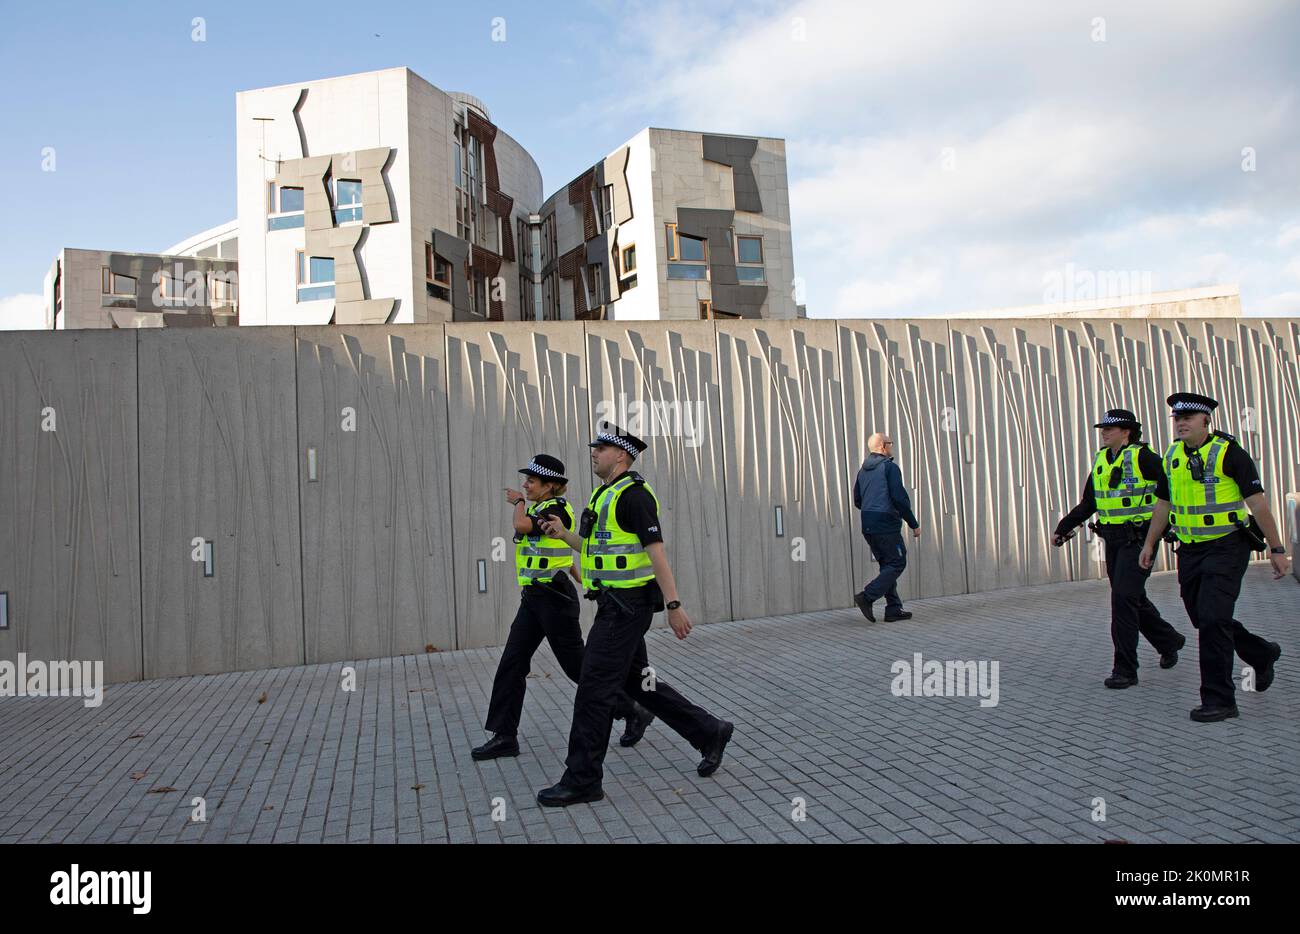 Holyrood, Edinburgh, Scotland, UK. 12th September 2022. Security for King Charles 111 at Scottish Parliament and  Holyrood Palace. Pictured: Police officers at Scottish Parliament building. Credit: Arch White/alamy live news. Stock Photo